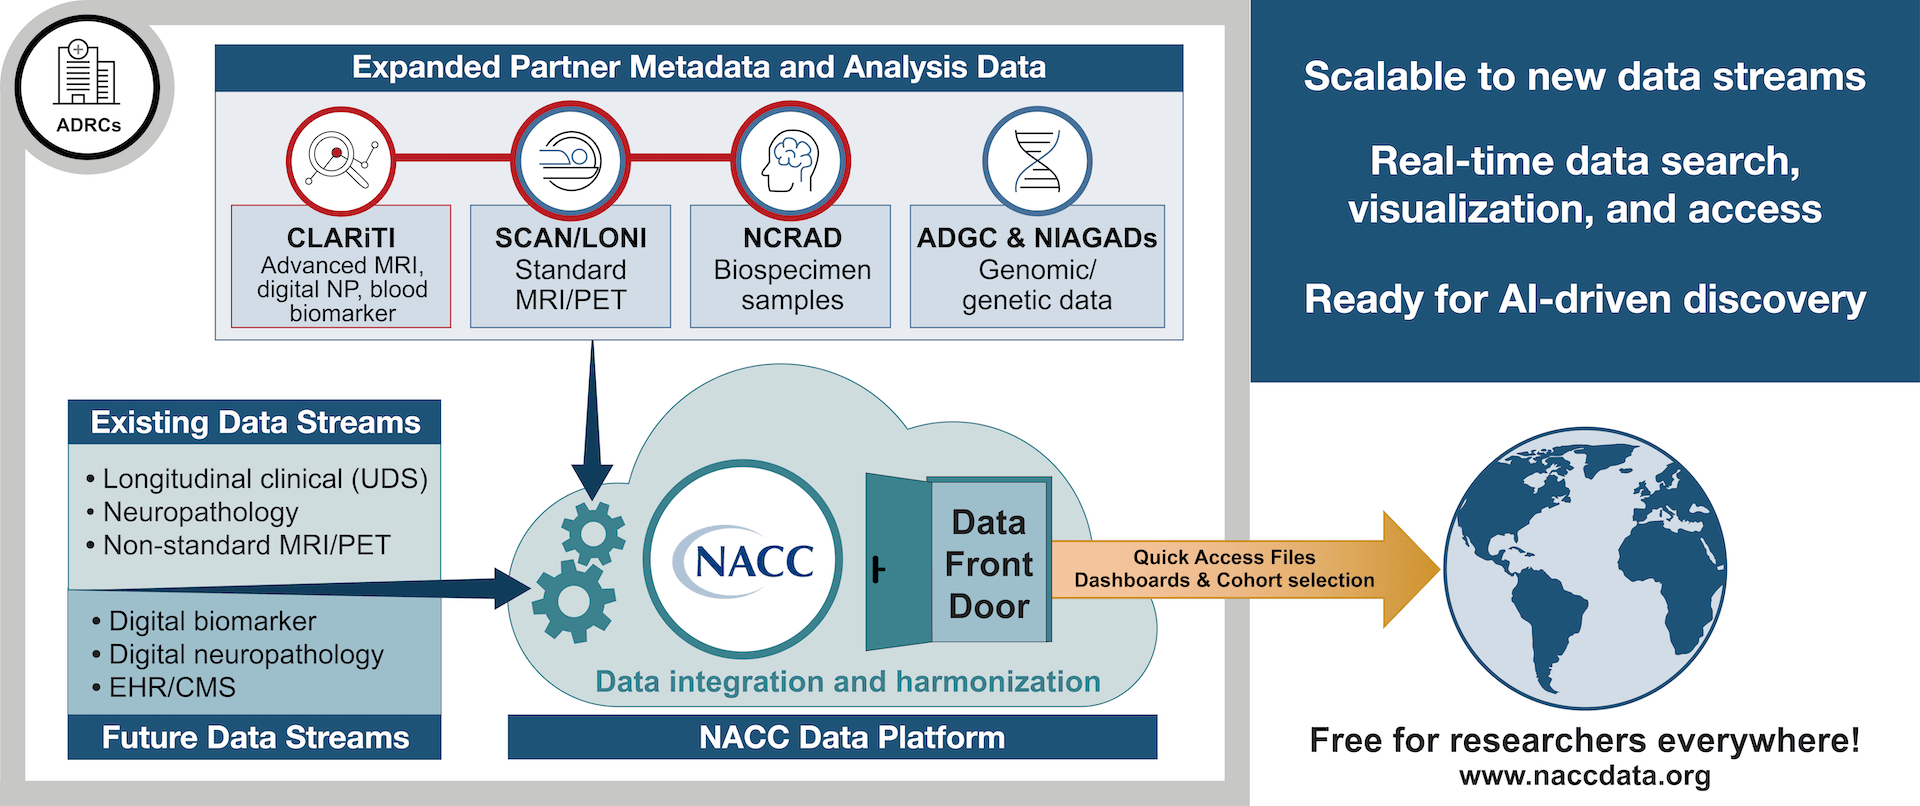 NACC relationships with ADRCs, SCAN, NCRAD, ADGC & NIAGADs, NACC and investigators